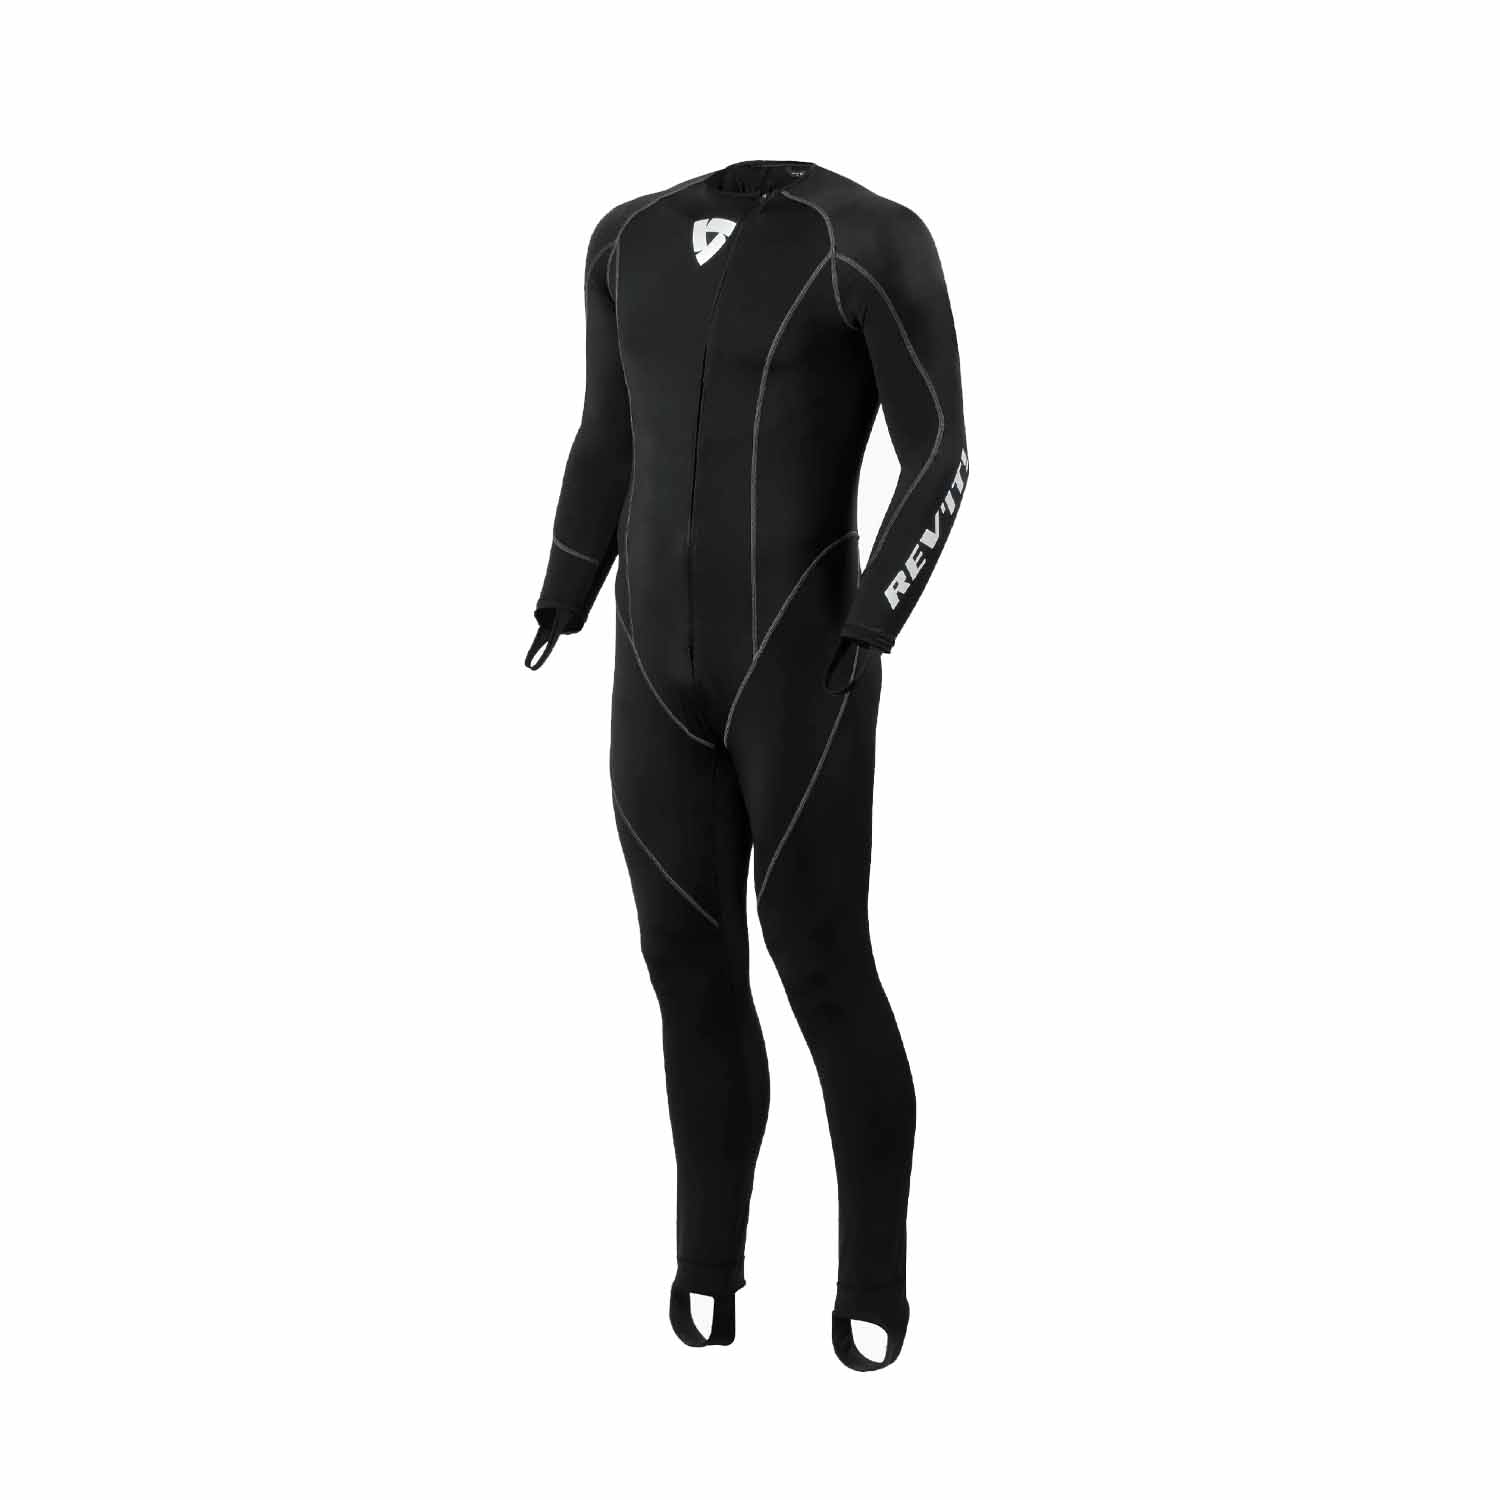 Image of REV'IT! Excellerator 2 Undersuit Black Taille 2XL